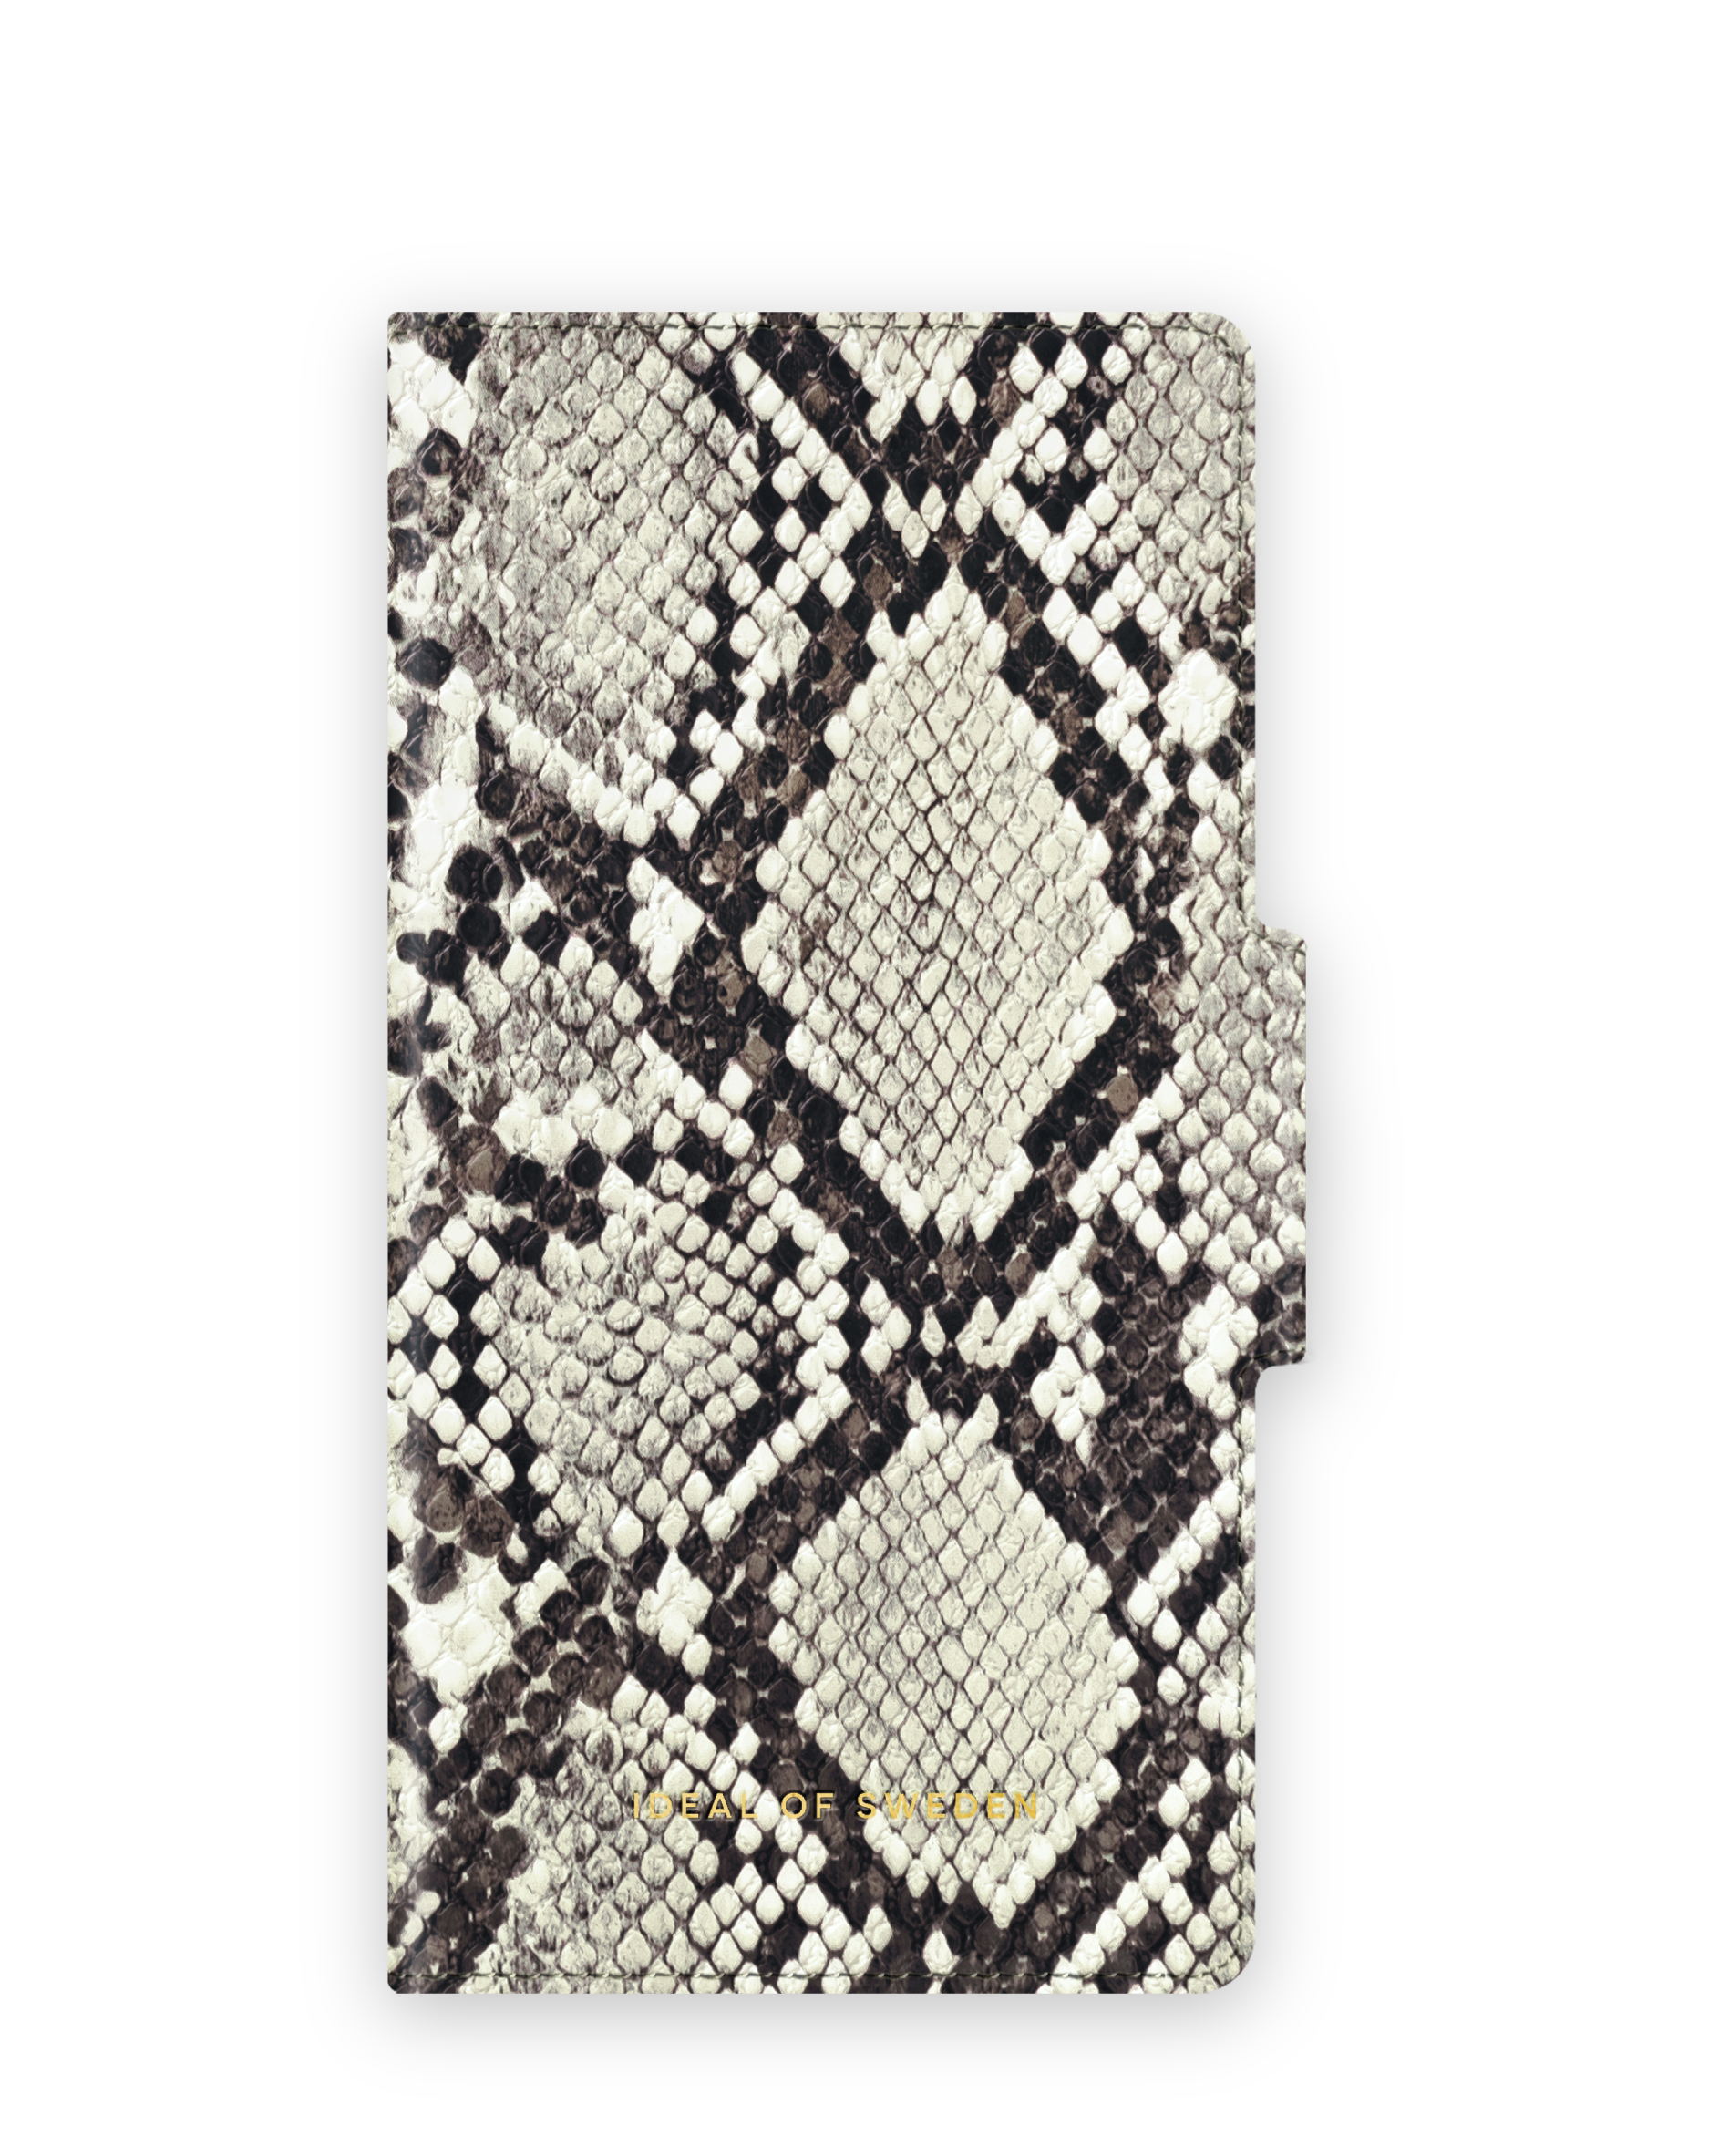 OF Bookcover, Eternal IDAW-I2061-231, iPhone SWEDEN IDEAL iPhone Snake Pro, Apple 12 Apple 12, Apple,